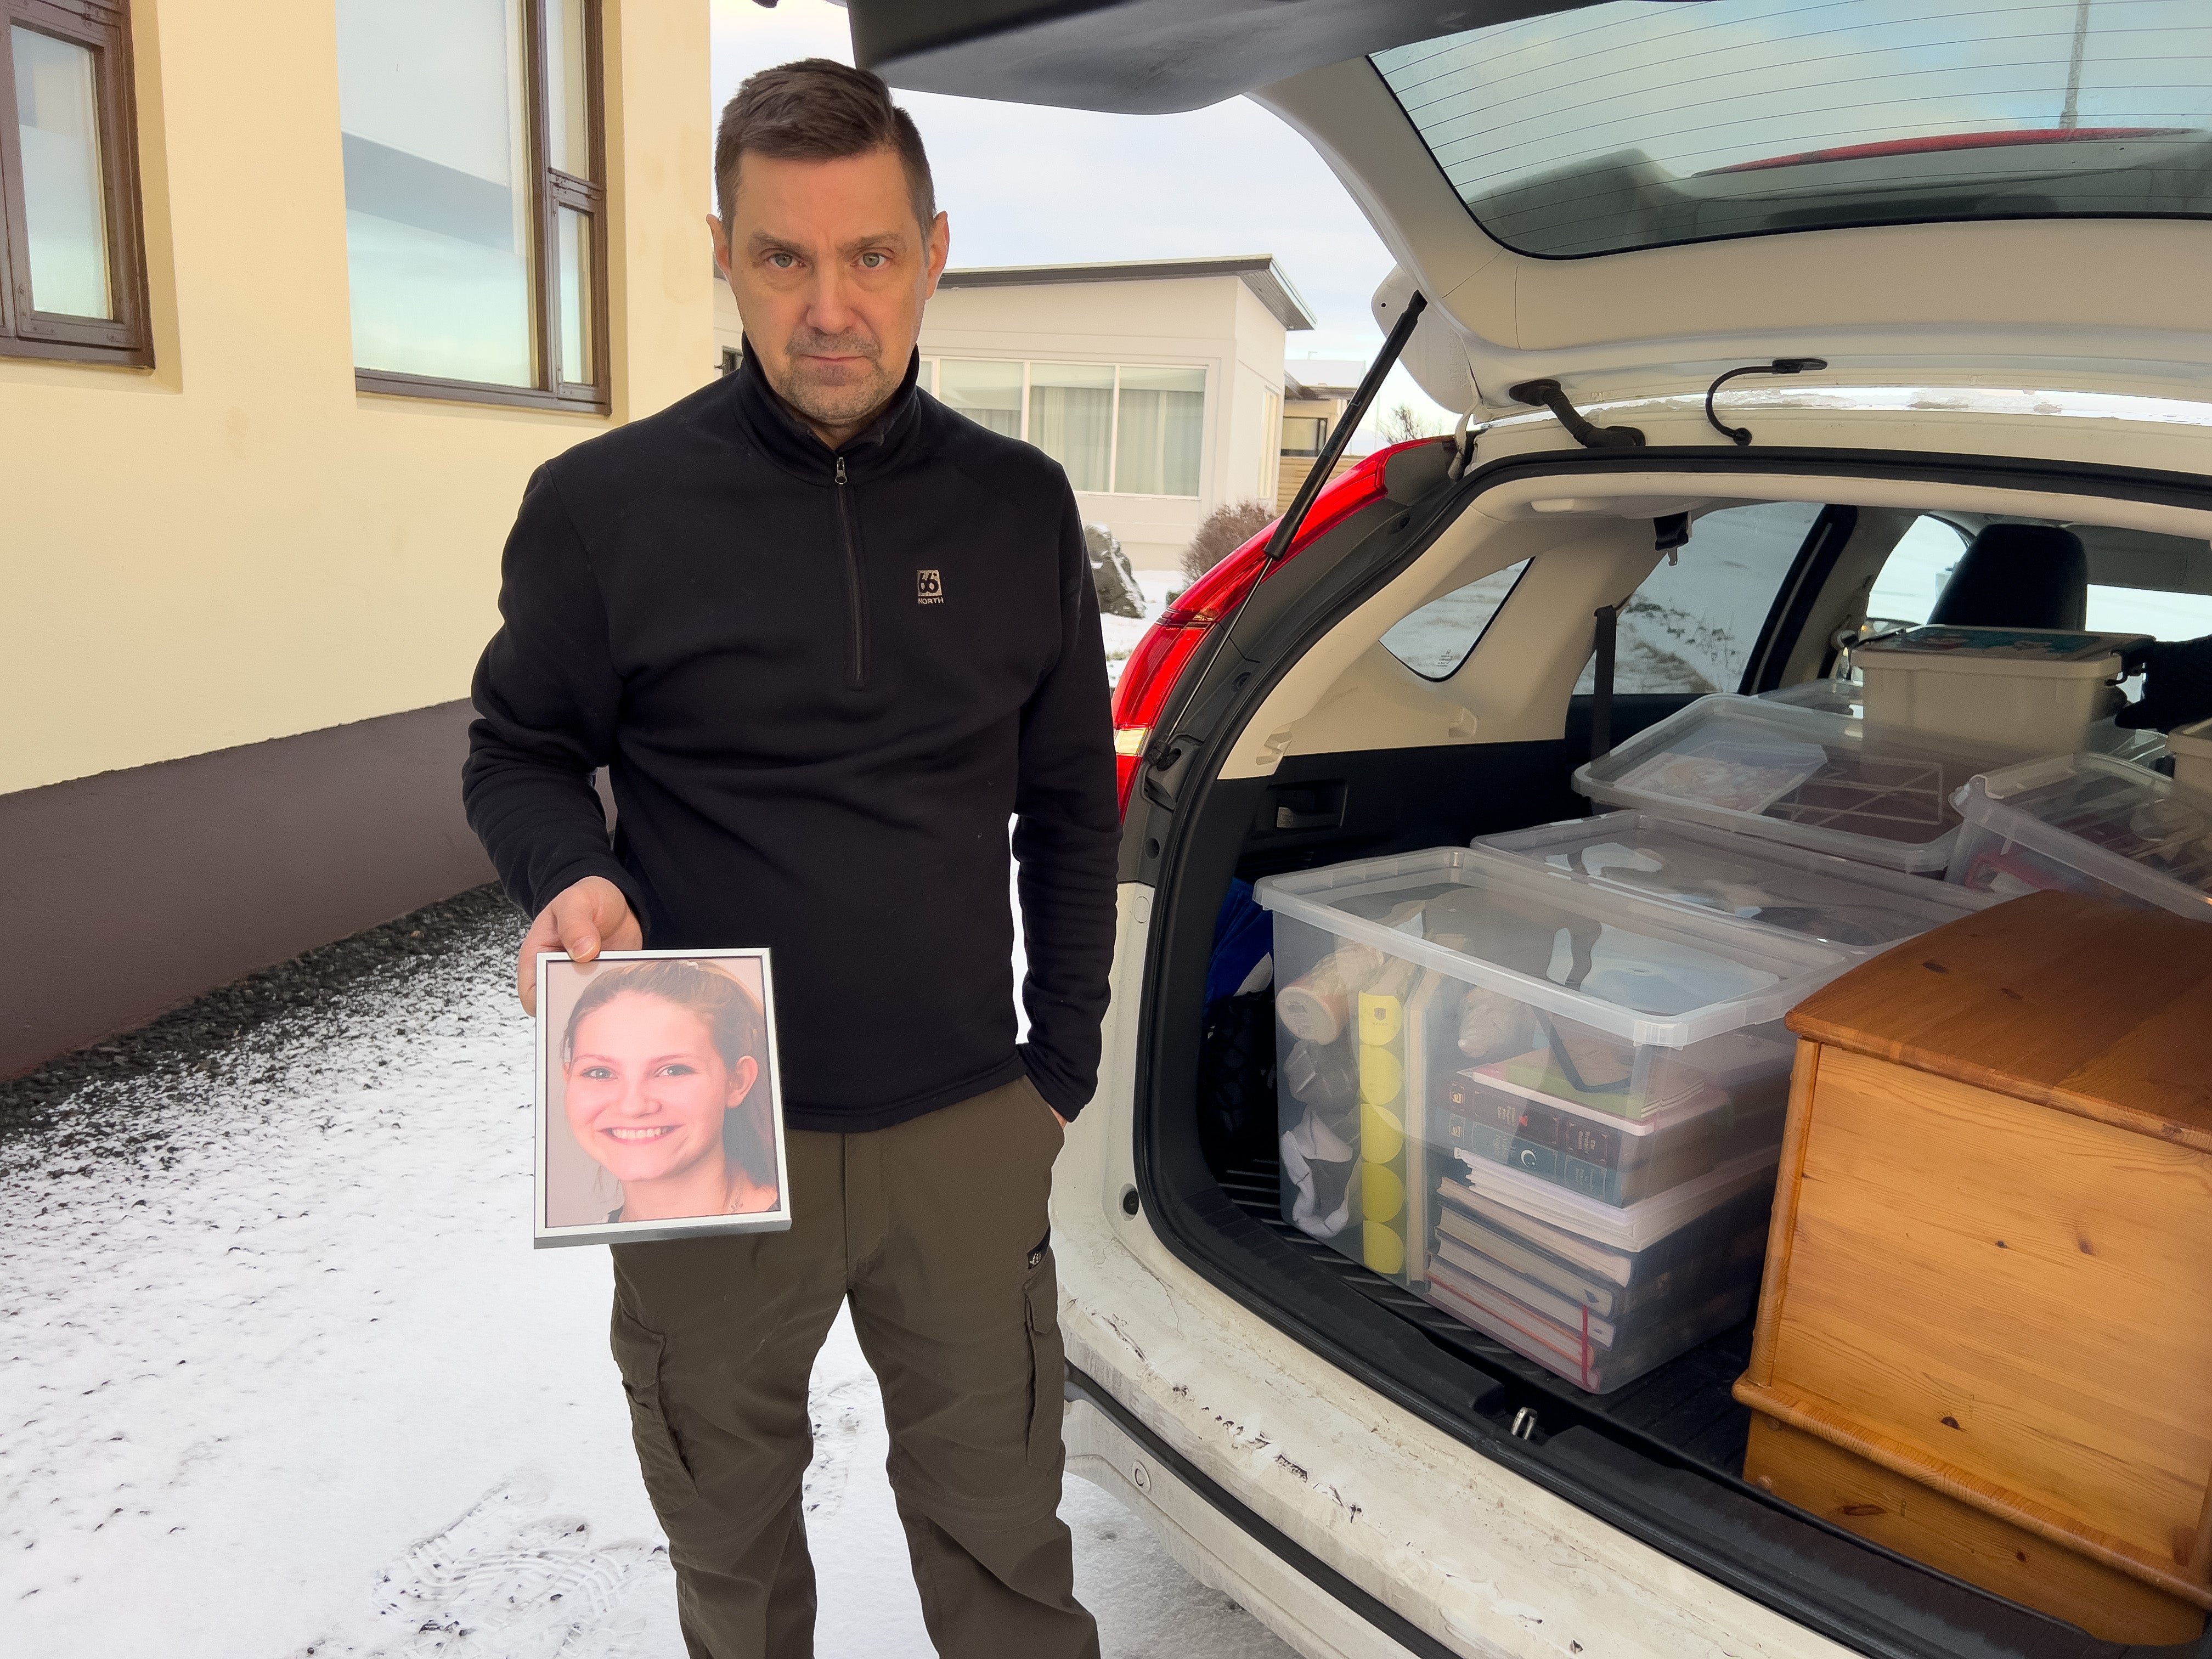 <p>A Grindavik resident packs up his belongings including a picture of his daughter Alma, who was killed in a car accident several years ago</p>